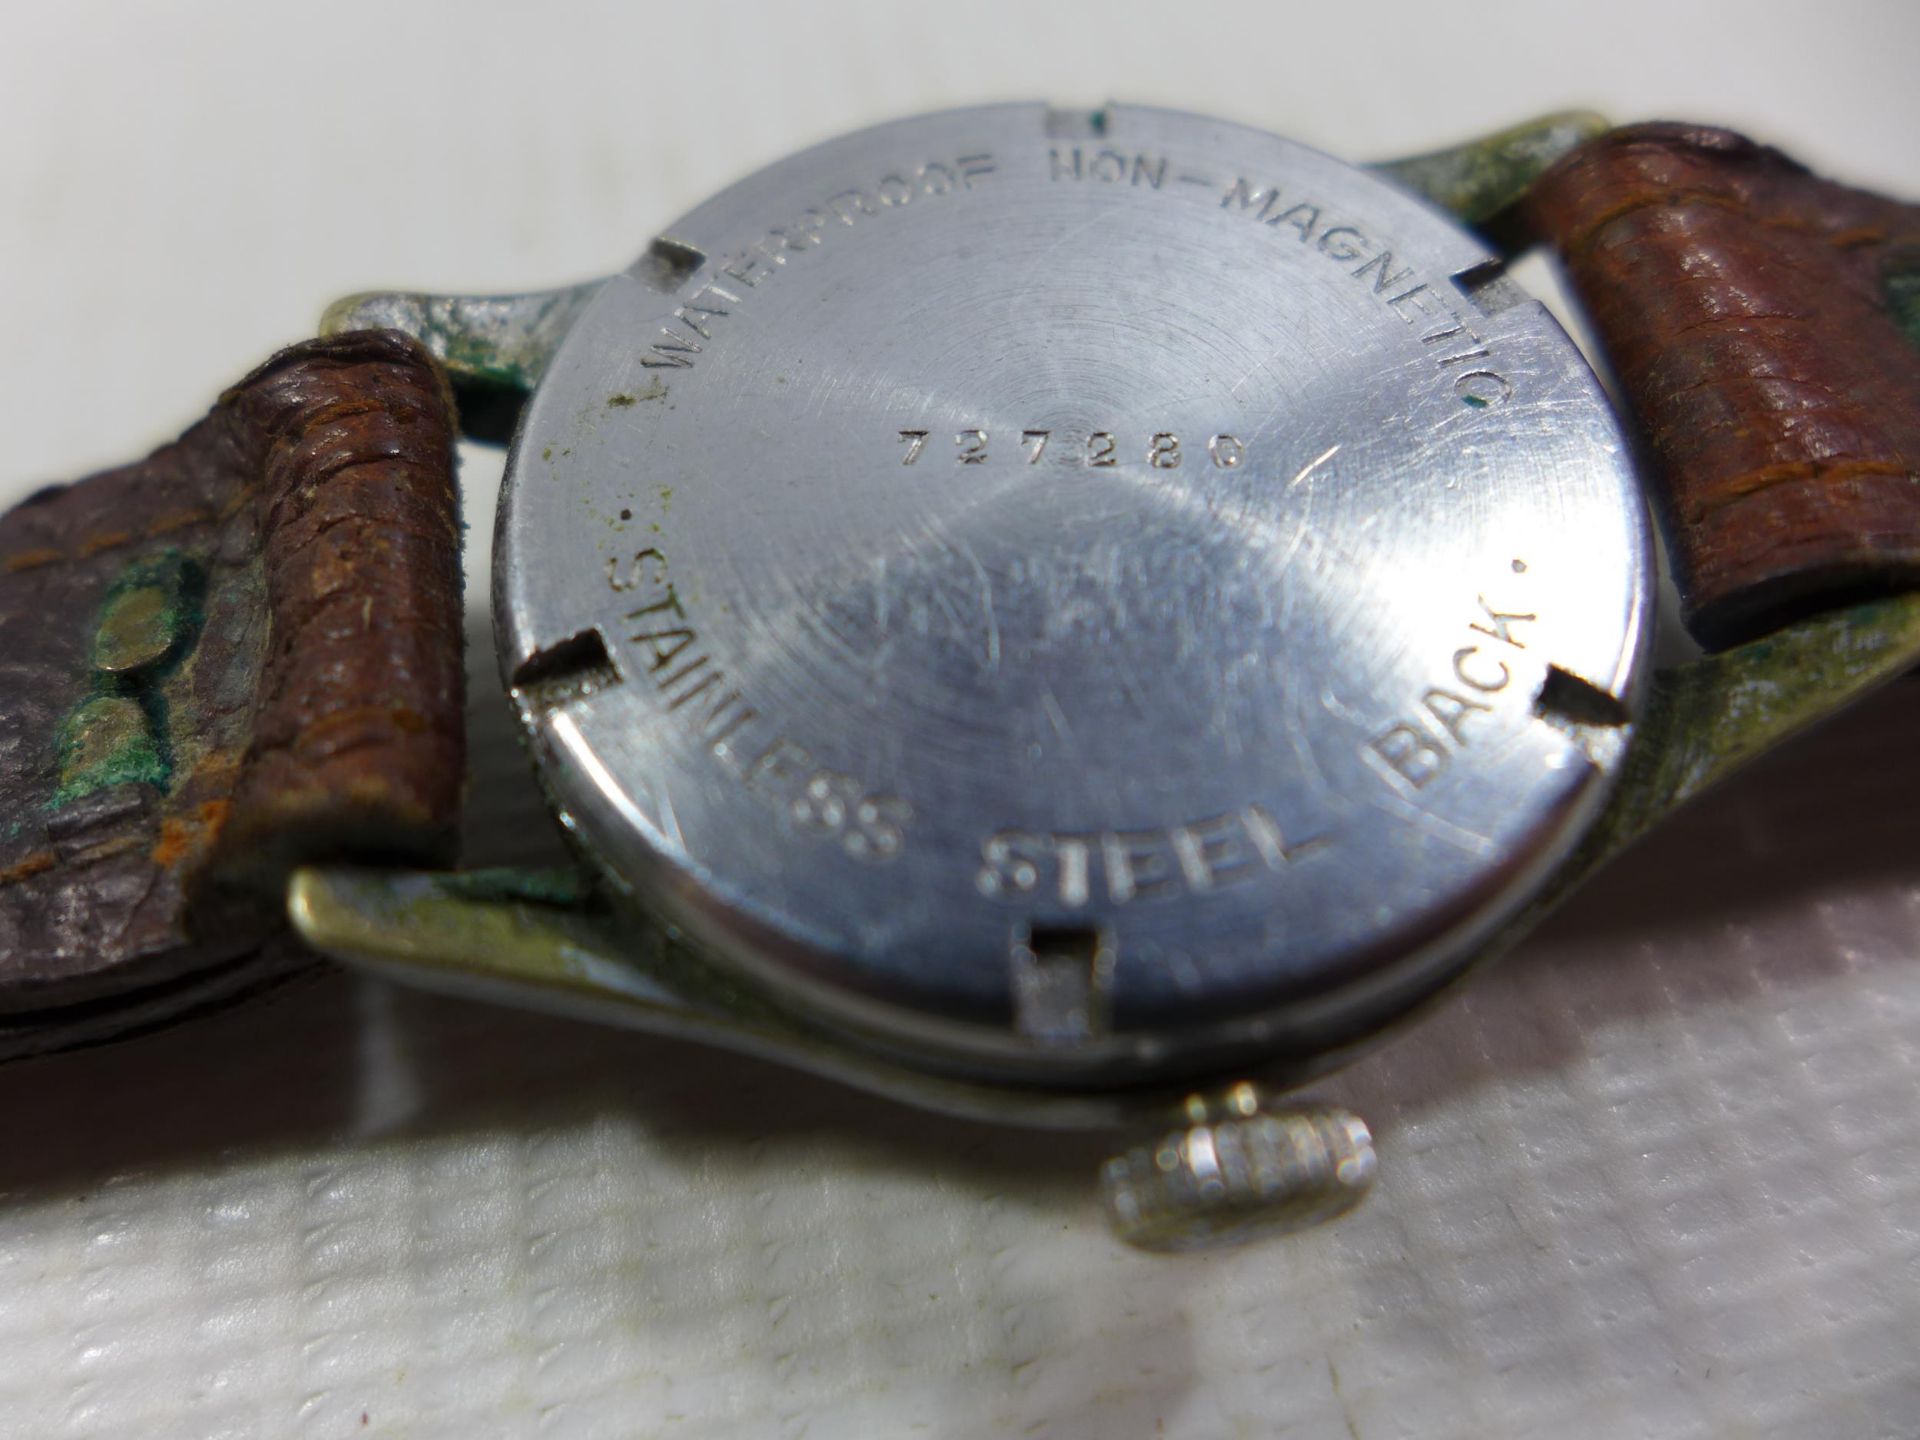 A TITUS MANS WRISTWATCH, DIAMETER OF FACE 2.5CM, NOT WORKING WHEN CATALOGUED - Image 2 of 4